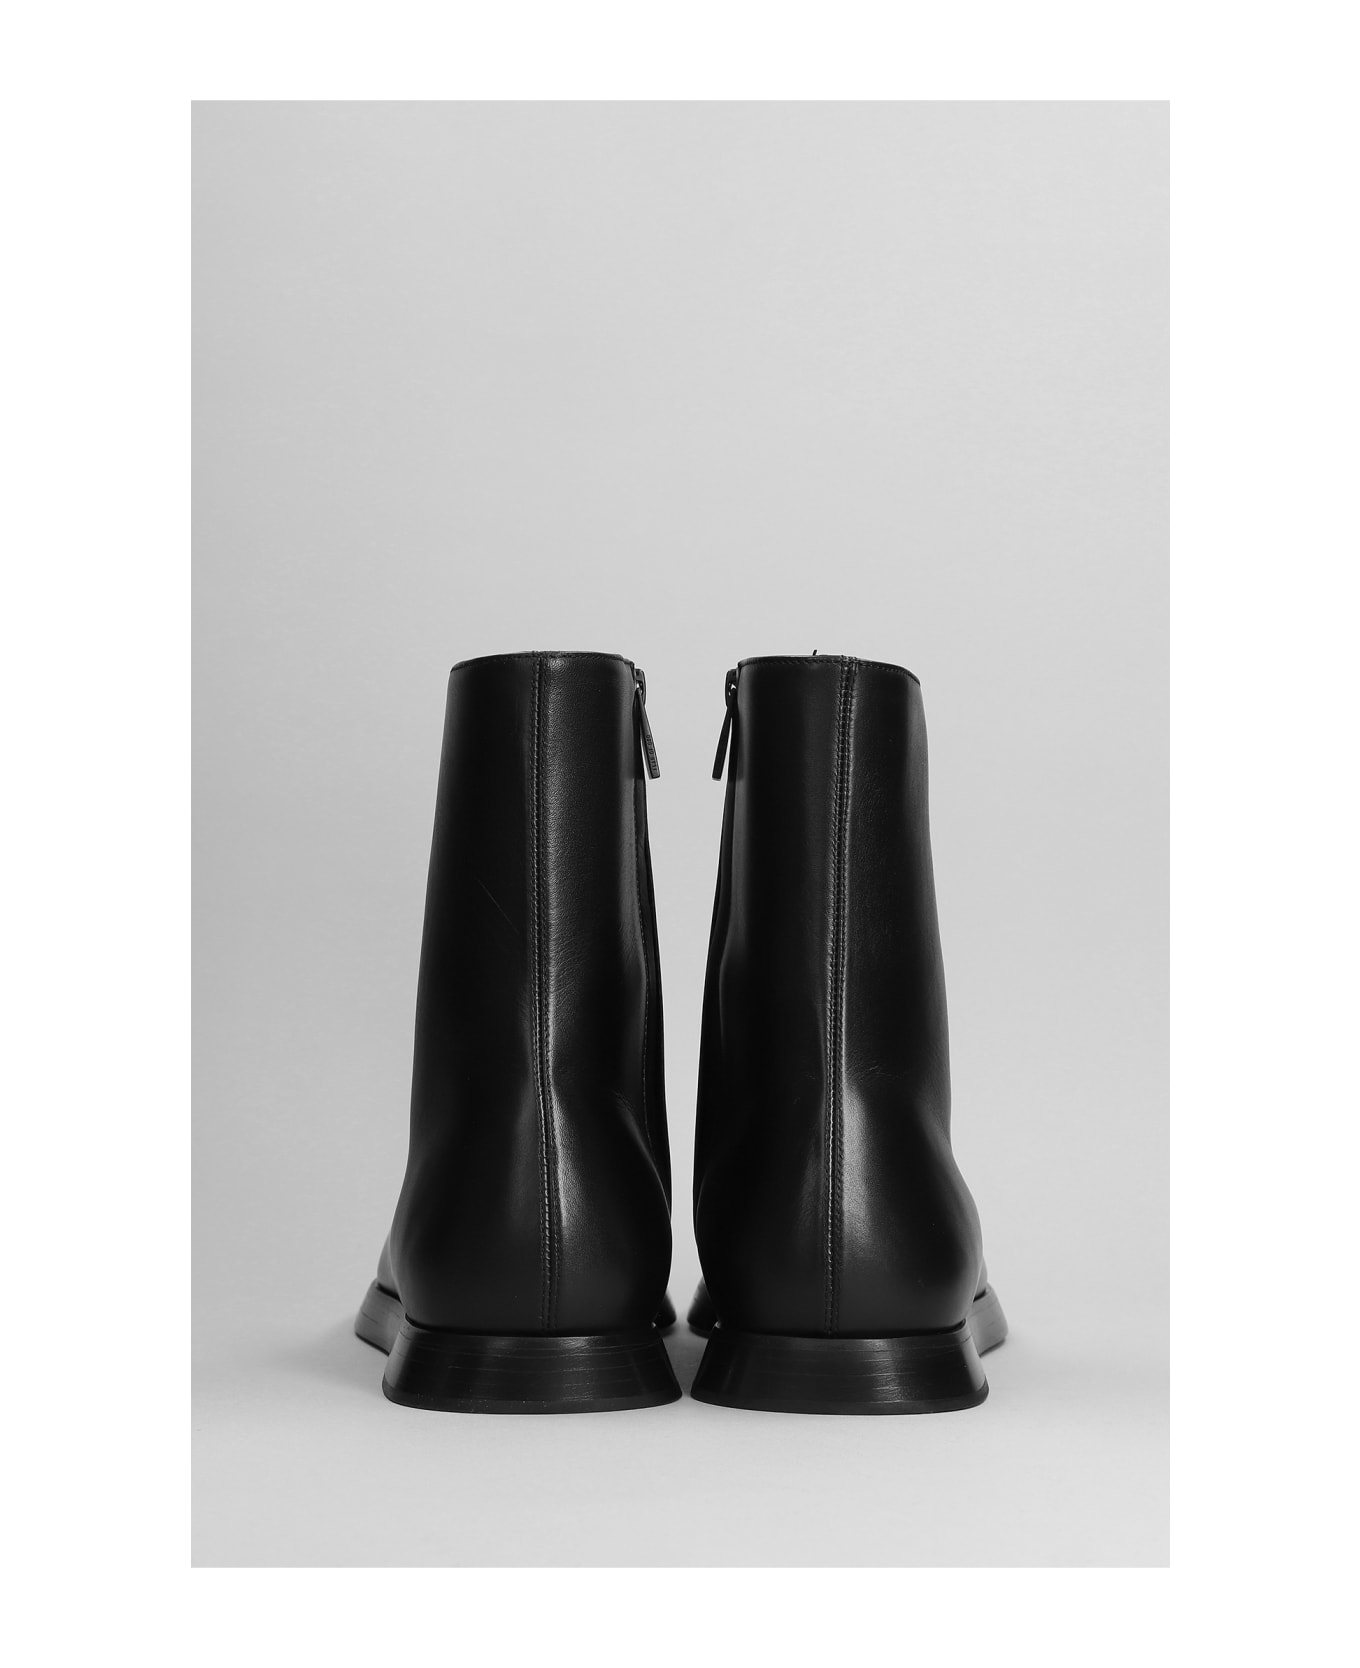 Fear of God High Mule Ankle Boots In Black Leather - black